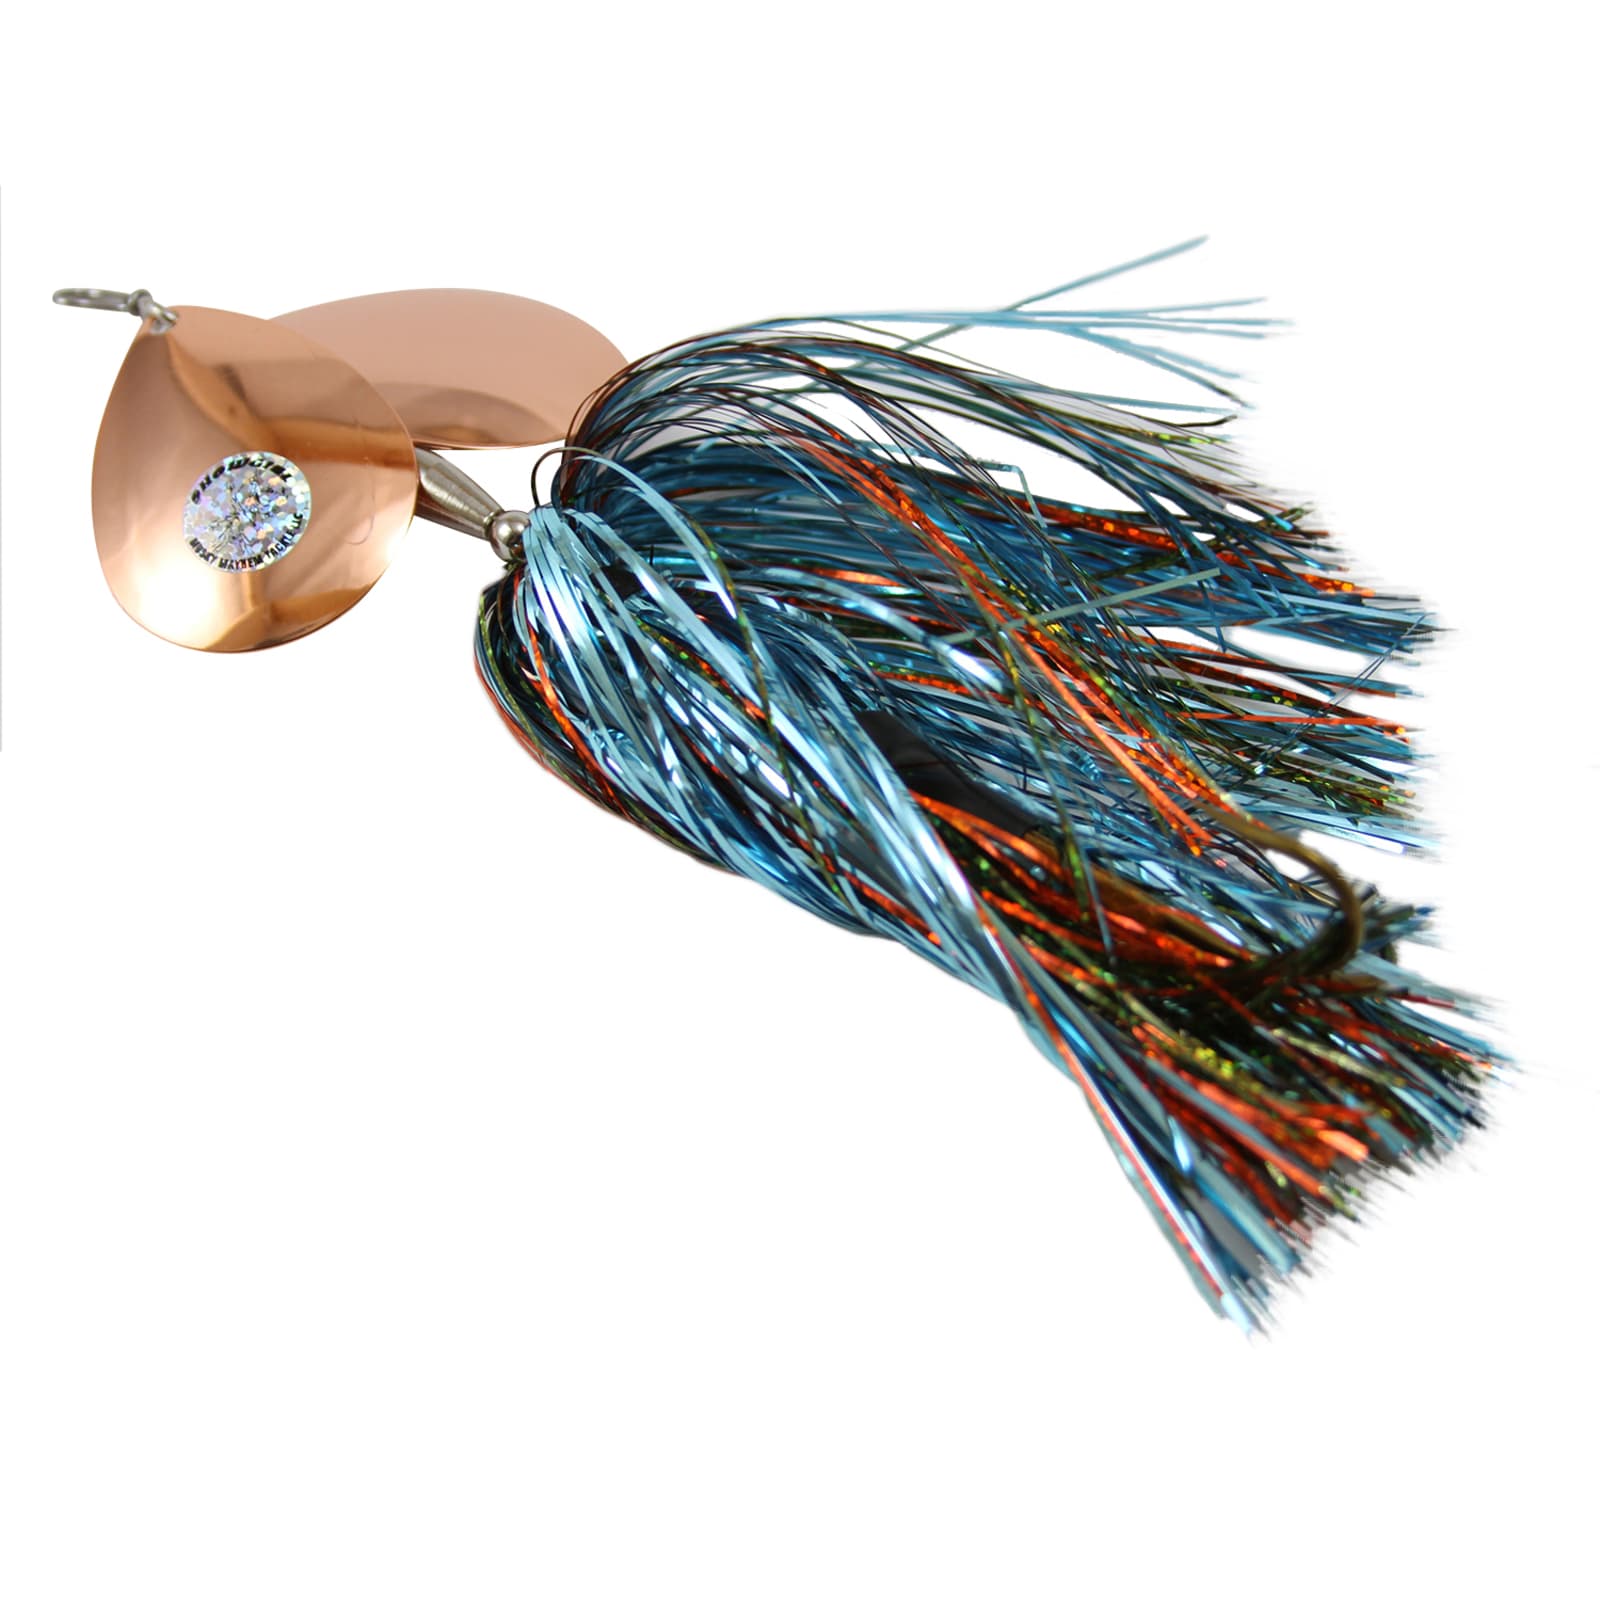 Double Showgirl 7.5 in Black/Blue Musky Spinner Lure